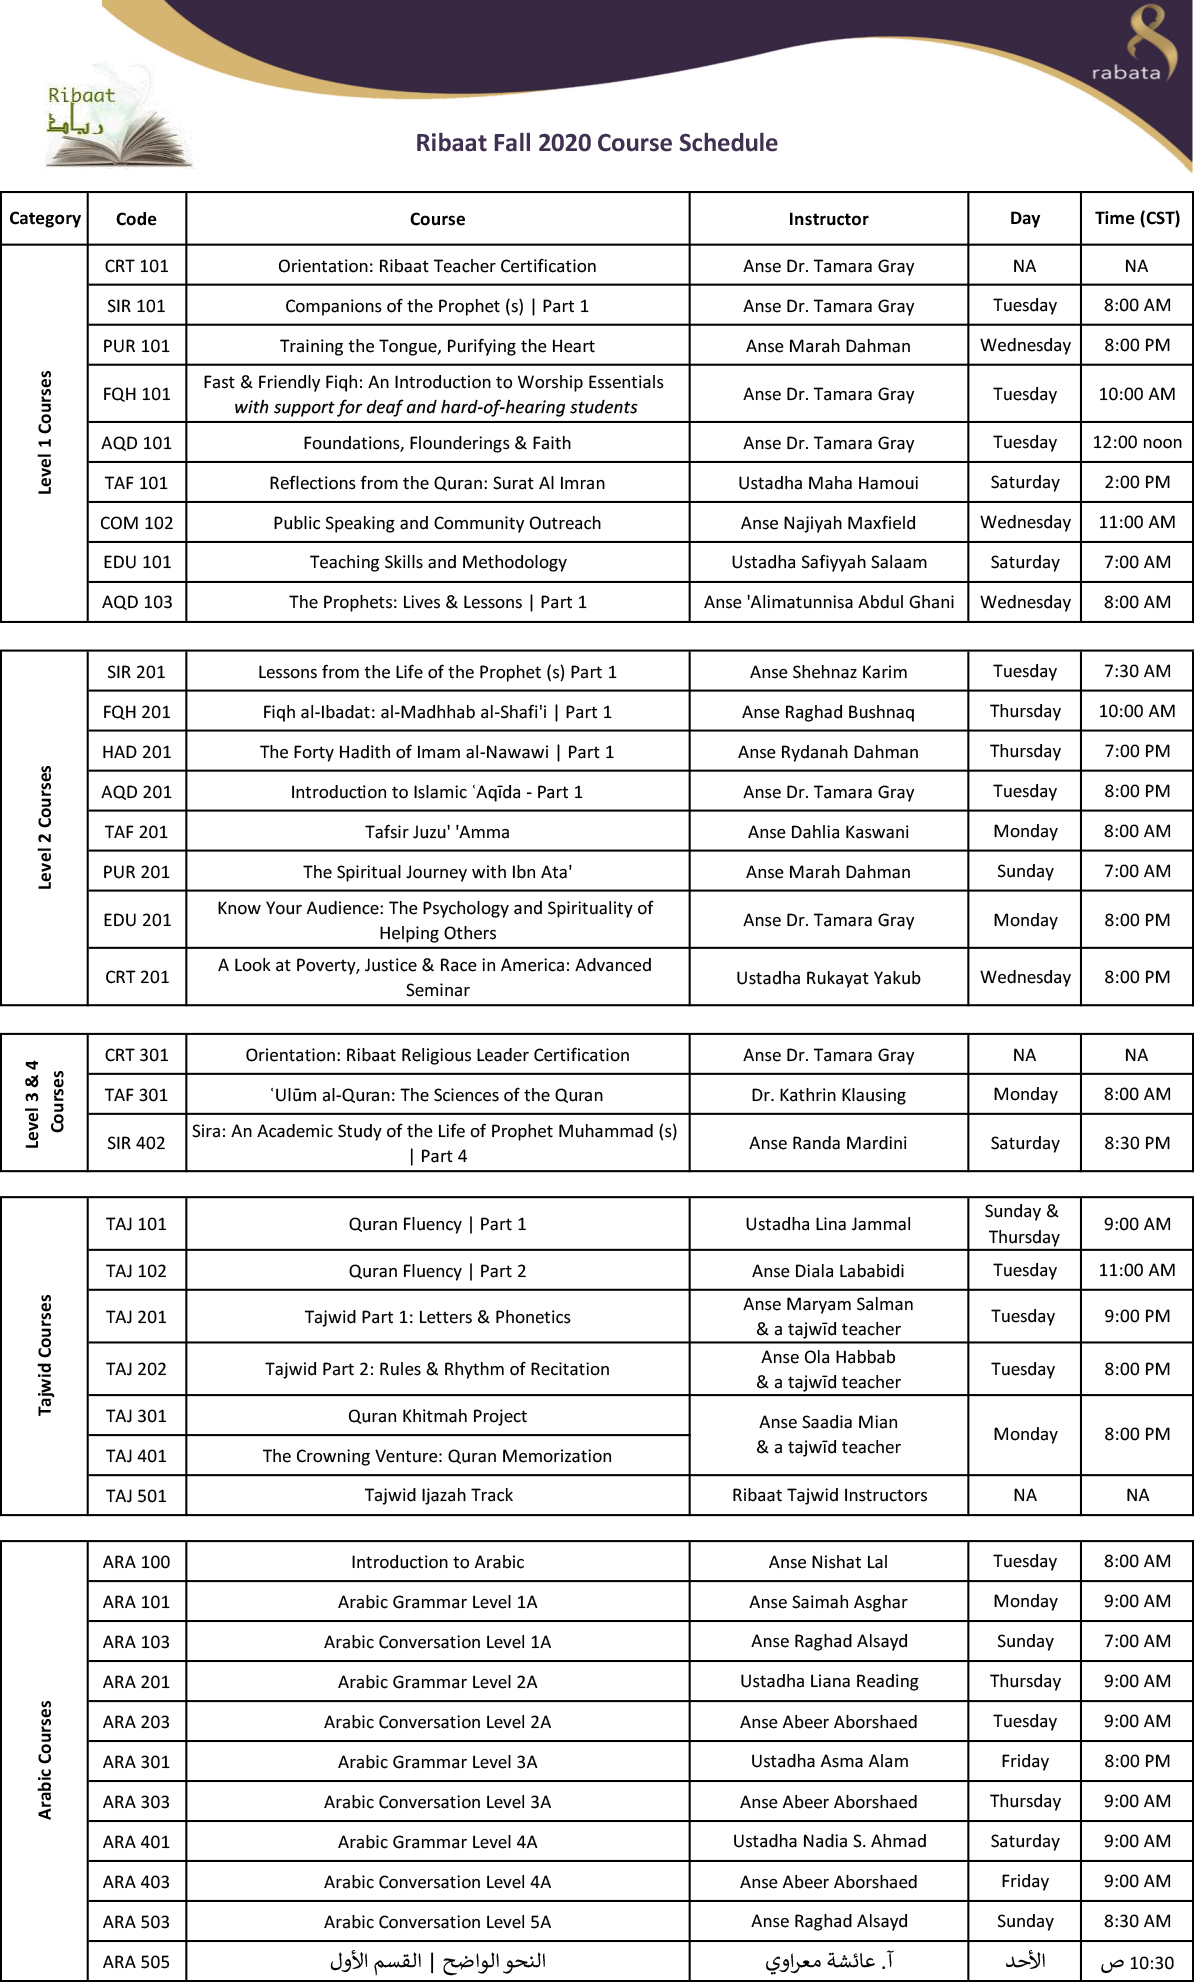 Ribaat Fall 2020 course list